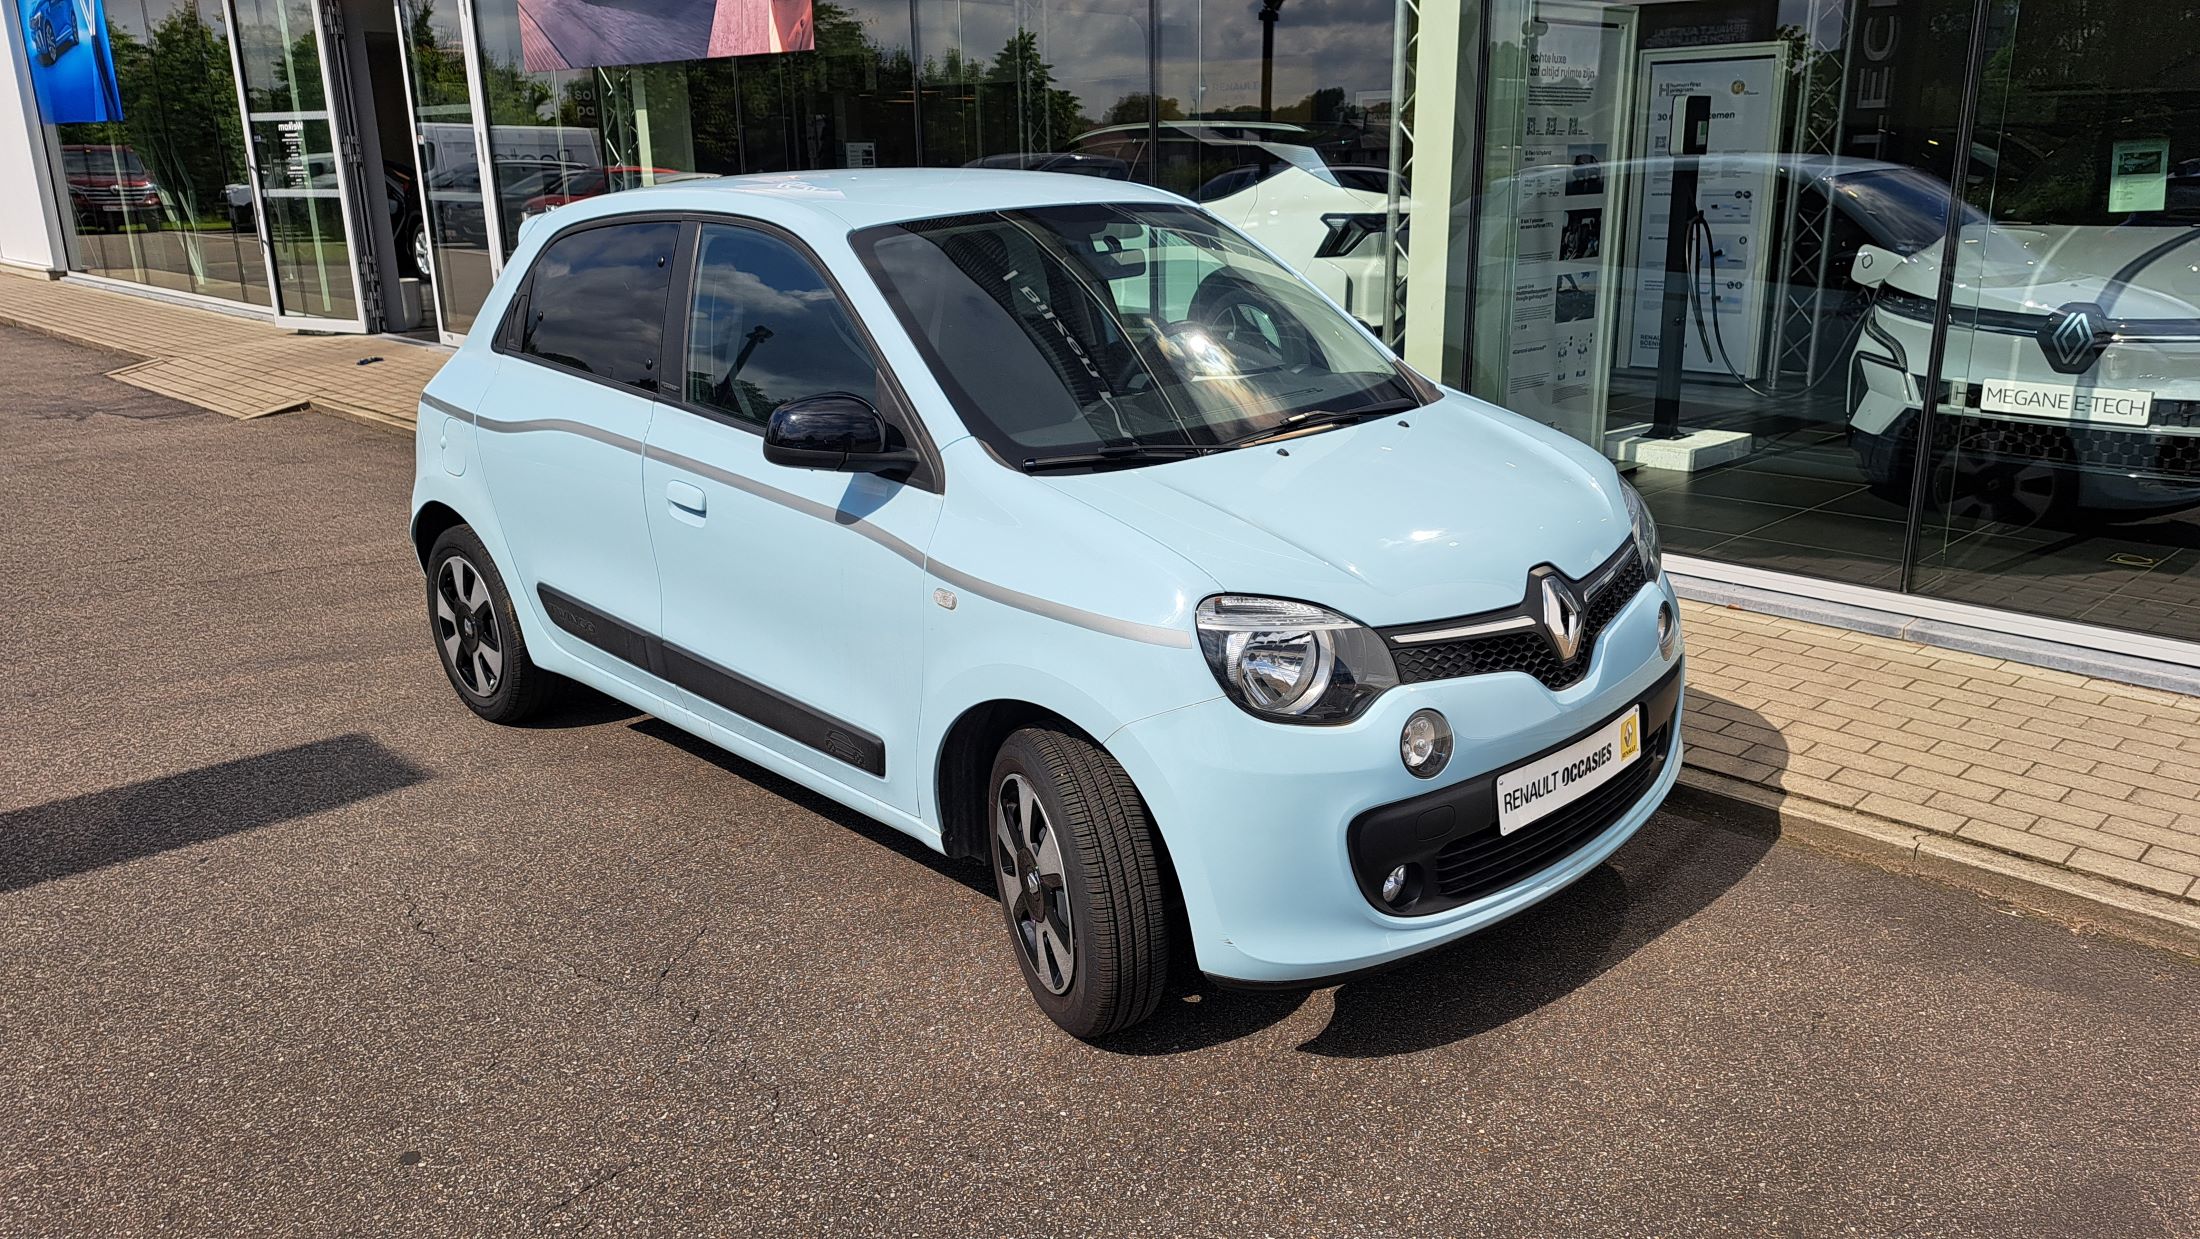 Renault Twingo 1.0i SCe Limited, airco, parkeerhulp A, bluetooth